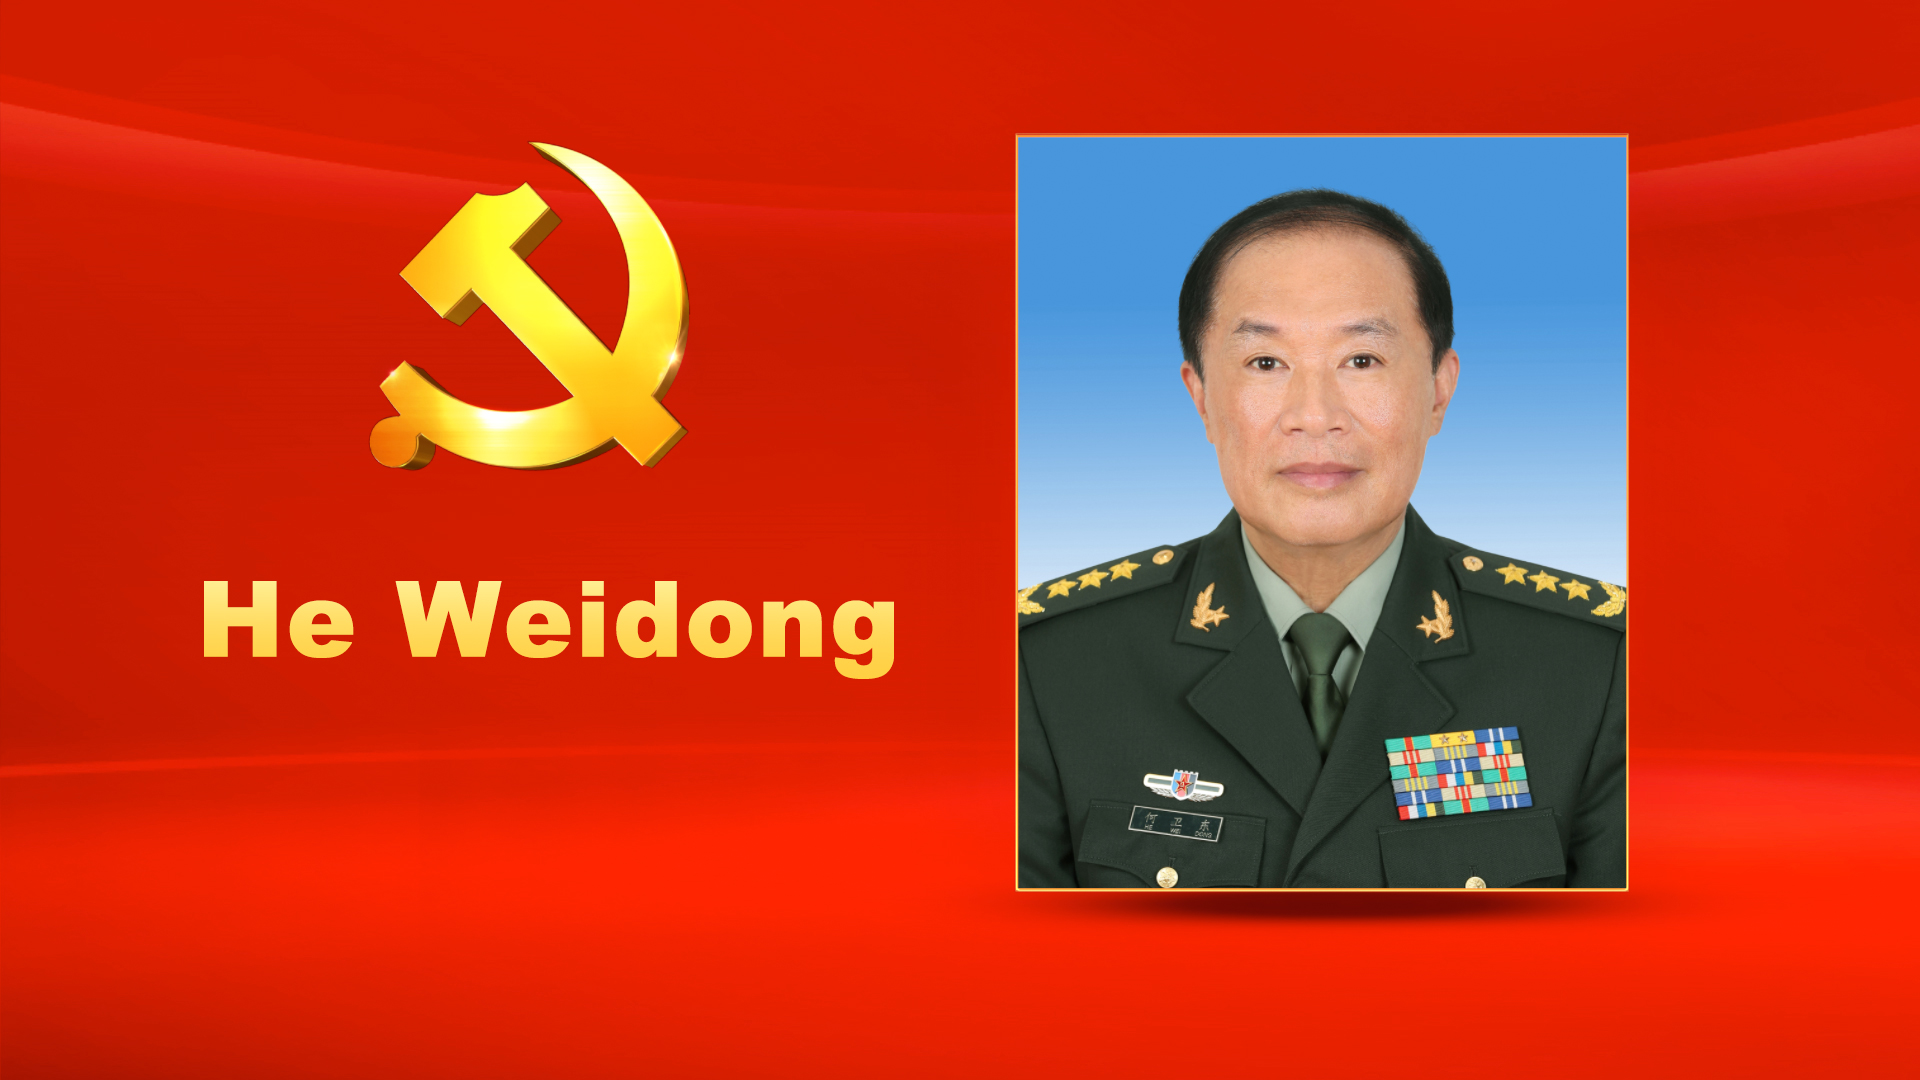 He Weidong, male, Han ethnicity, was born in May 1957 and is from Dongtai, Jiangsu Province. He joined the People's Liberation Army (PLA) in December 1972 and the Communist Party of China (CPC) in November 1978. He received an undergraduate education at the Central Party School. He is currently a member of the CPC Central Committee Political Bureau and serves as Vice Chairman of the CPC Central Military Commission. He holds the rank of general in the PLA Ground Force.